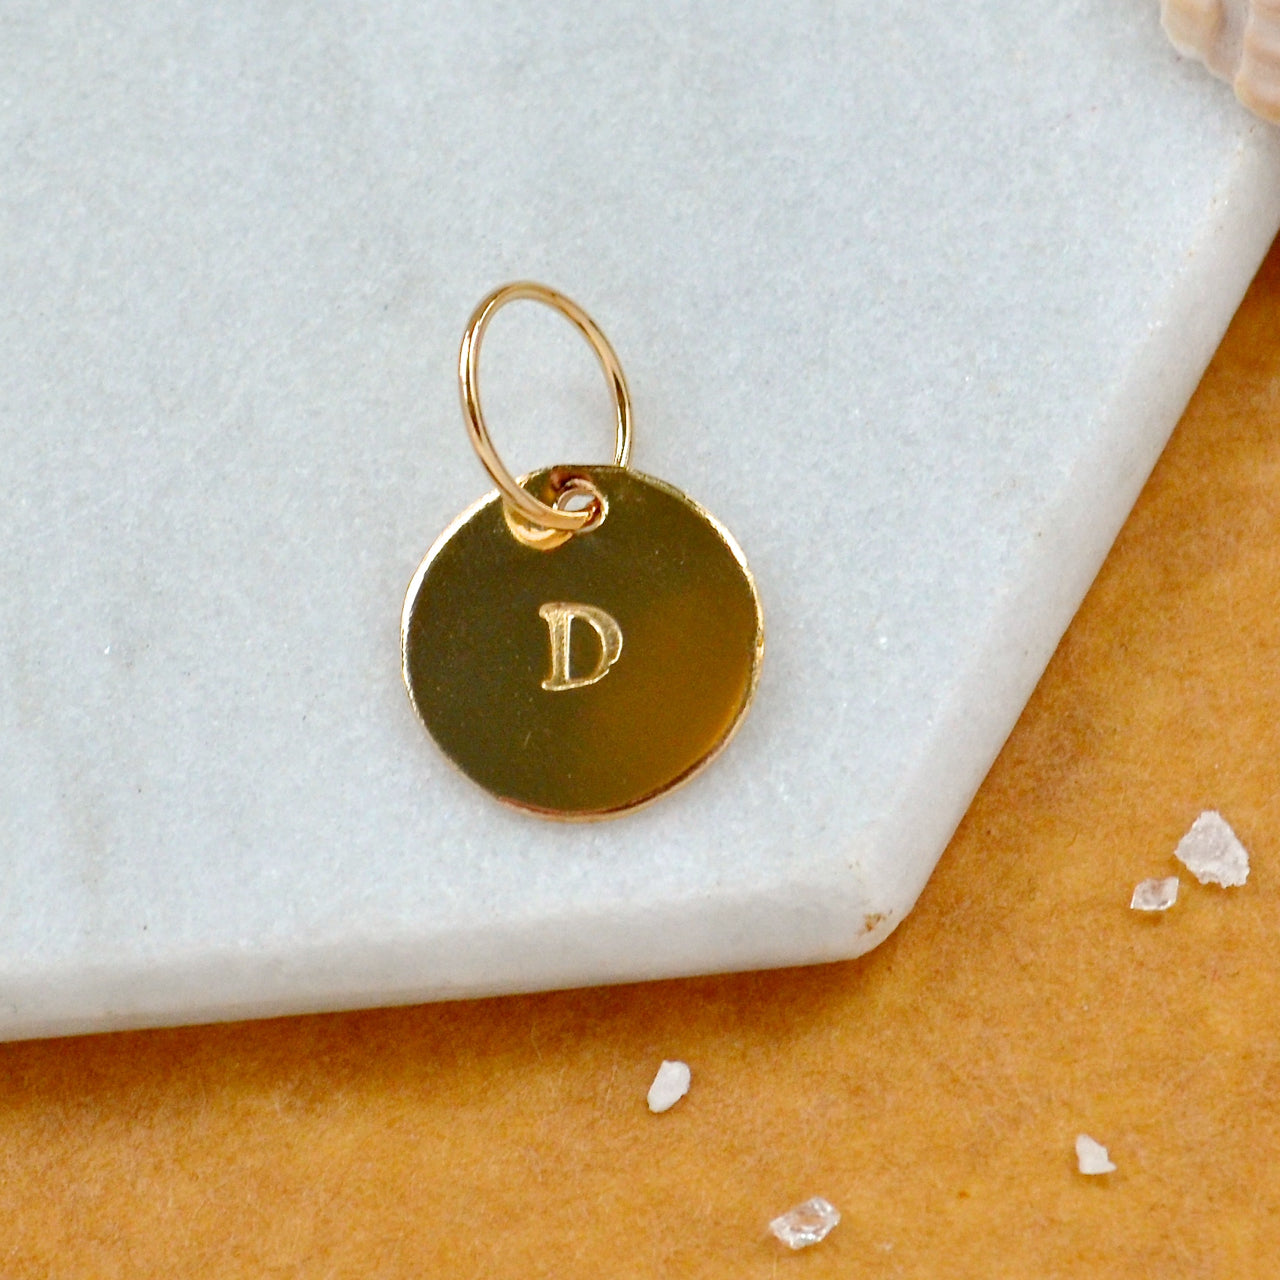 LETTER CHARM, capital D initial charms, handmade alphabet circle charm, D letter pendant, simple jewelry, delicate handmade charms, nickel-free jewelry, gold